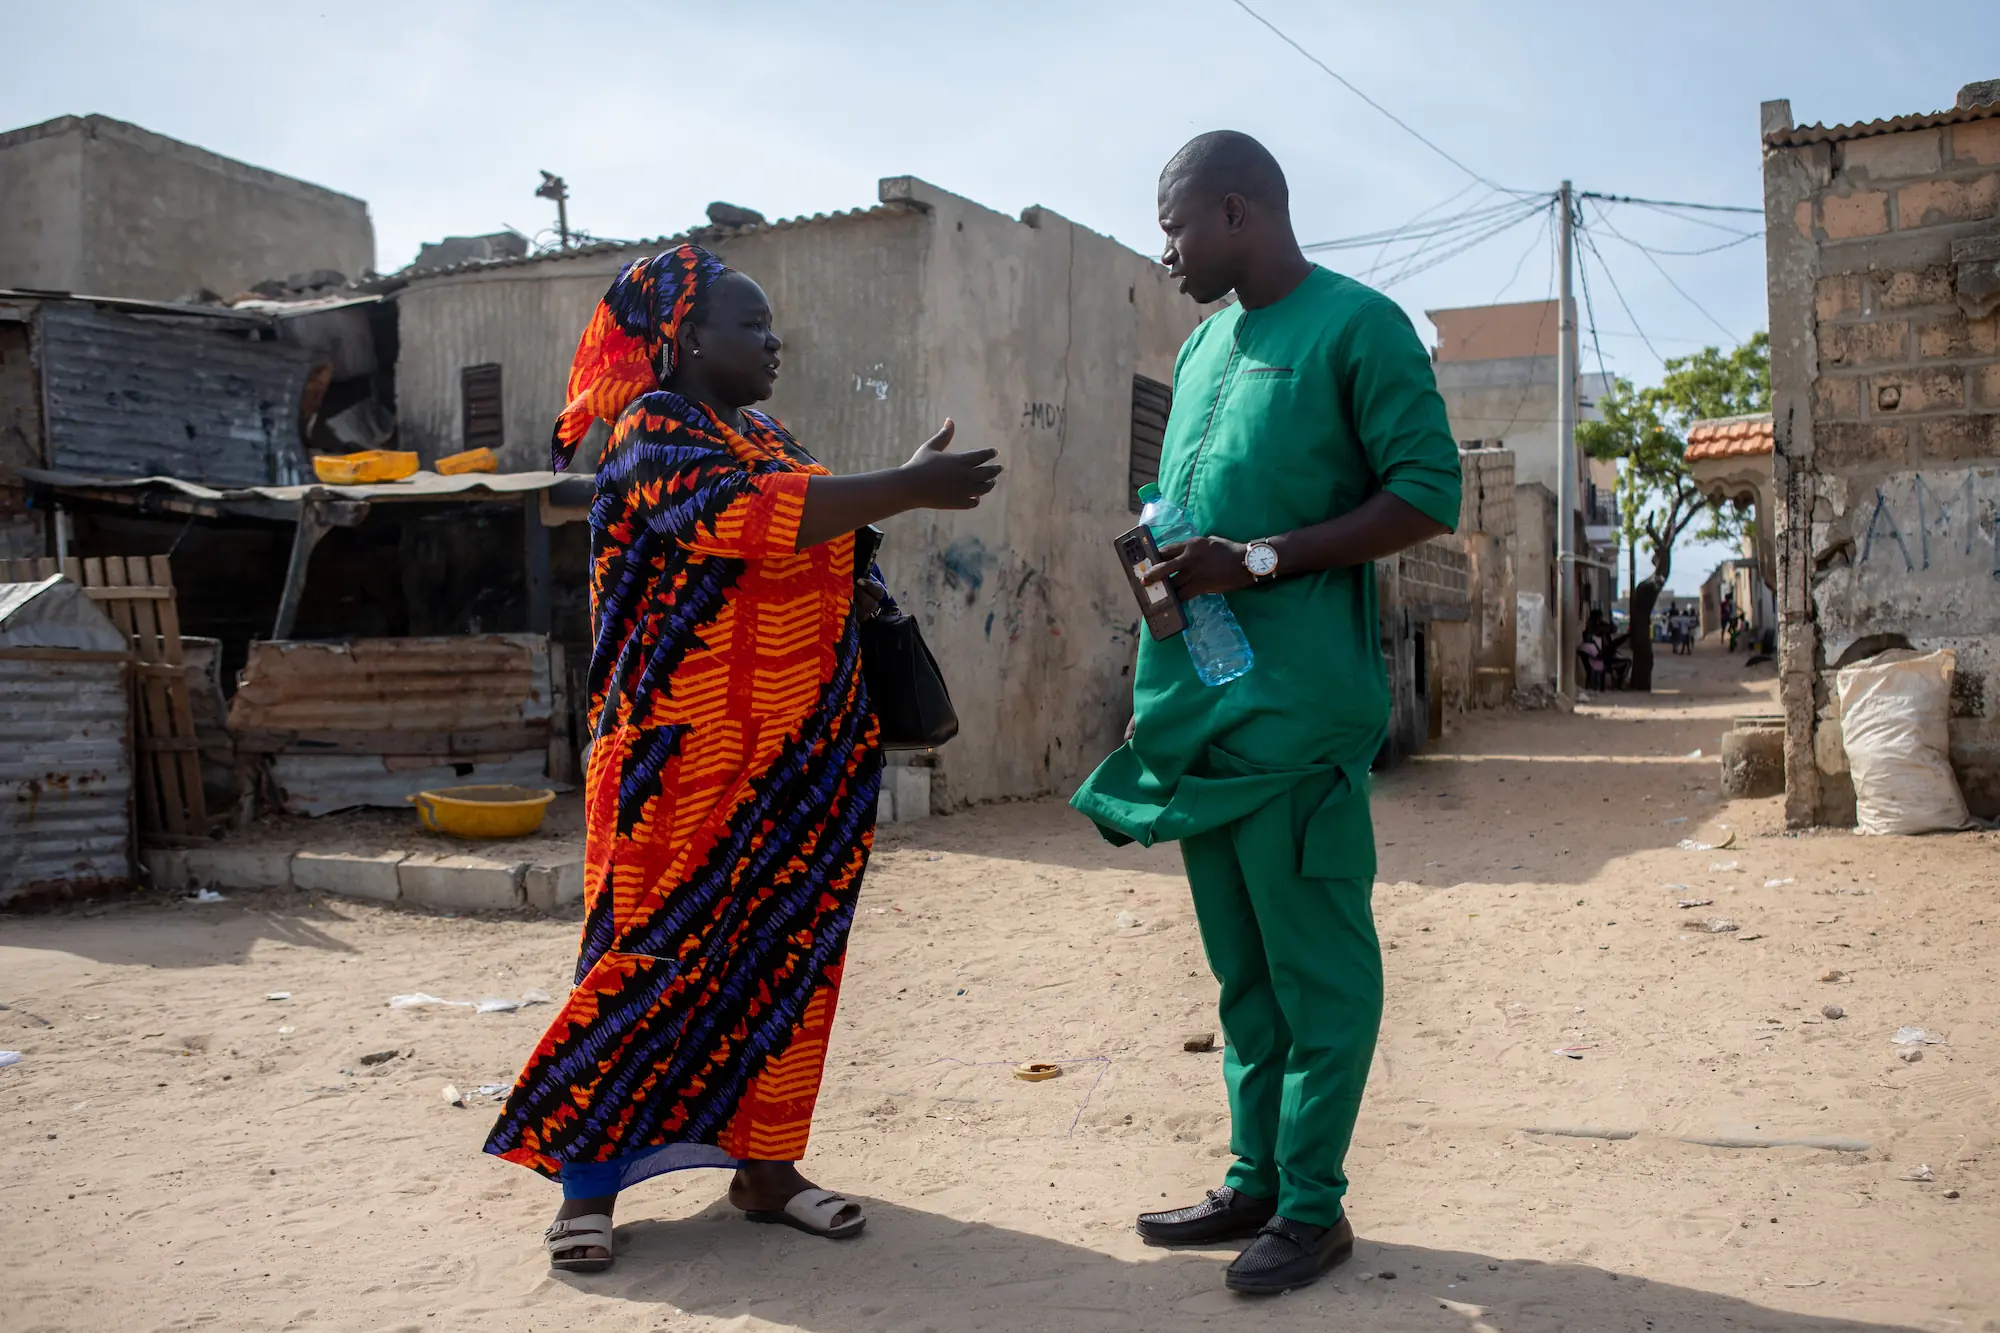 Astou Mbengue (L), lead data collector for the Senegalese Federation of Inhabitants, speaks with a government representative (R) during a site inspection in Pikine, Dakar